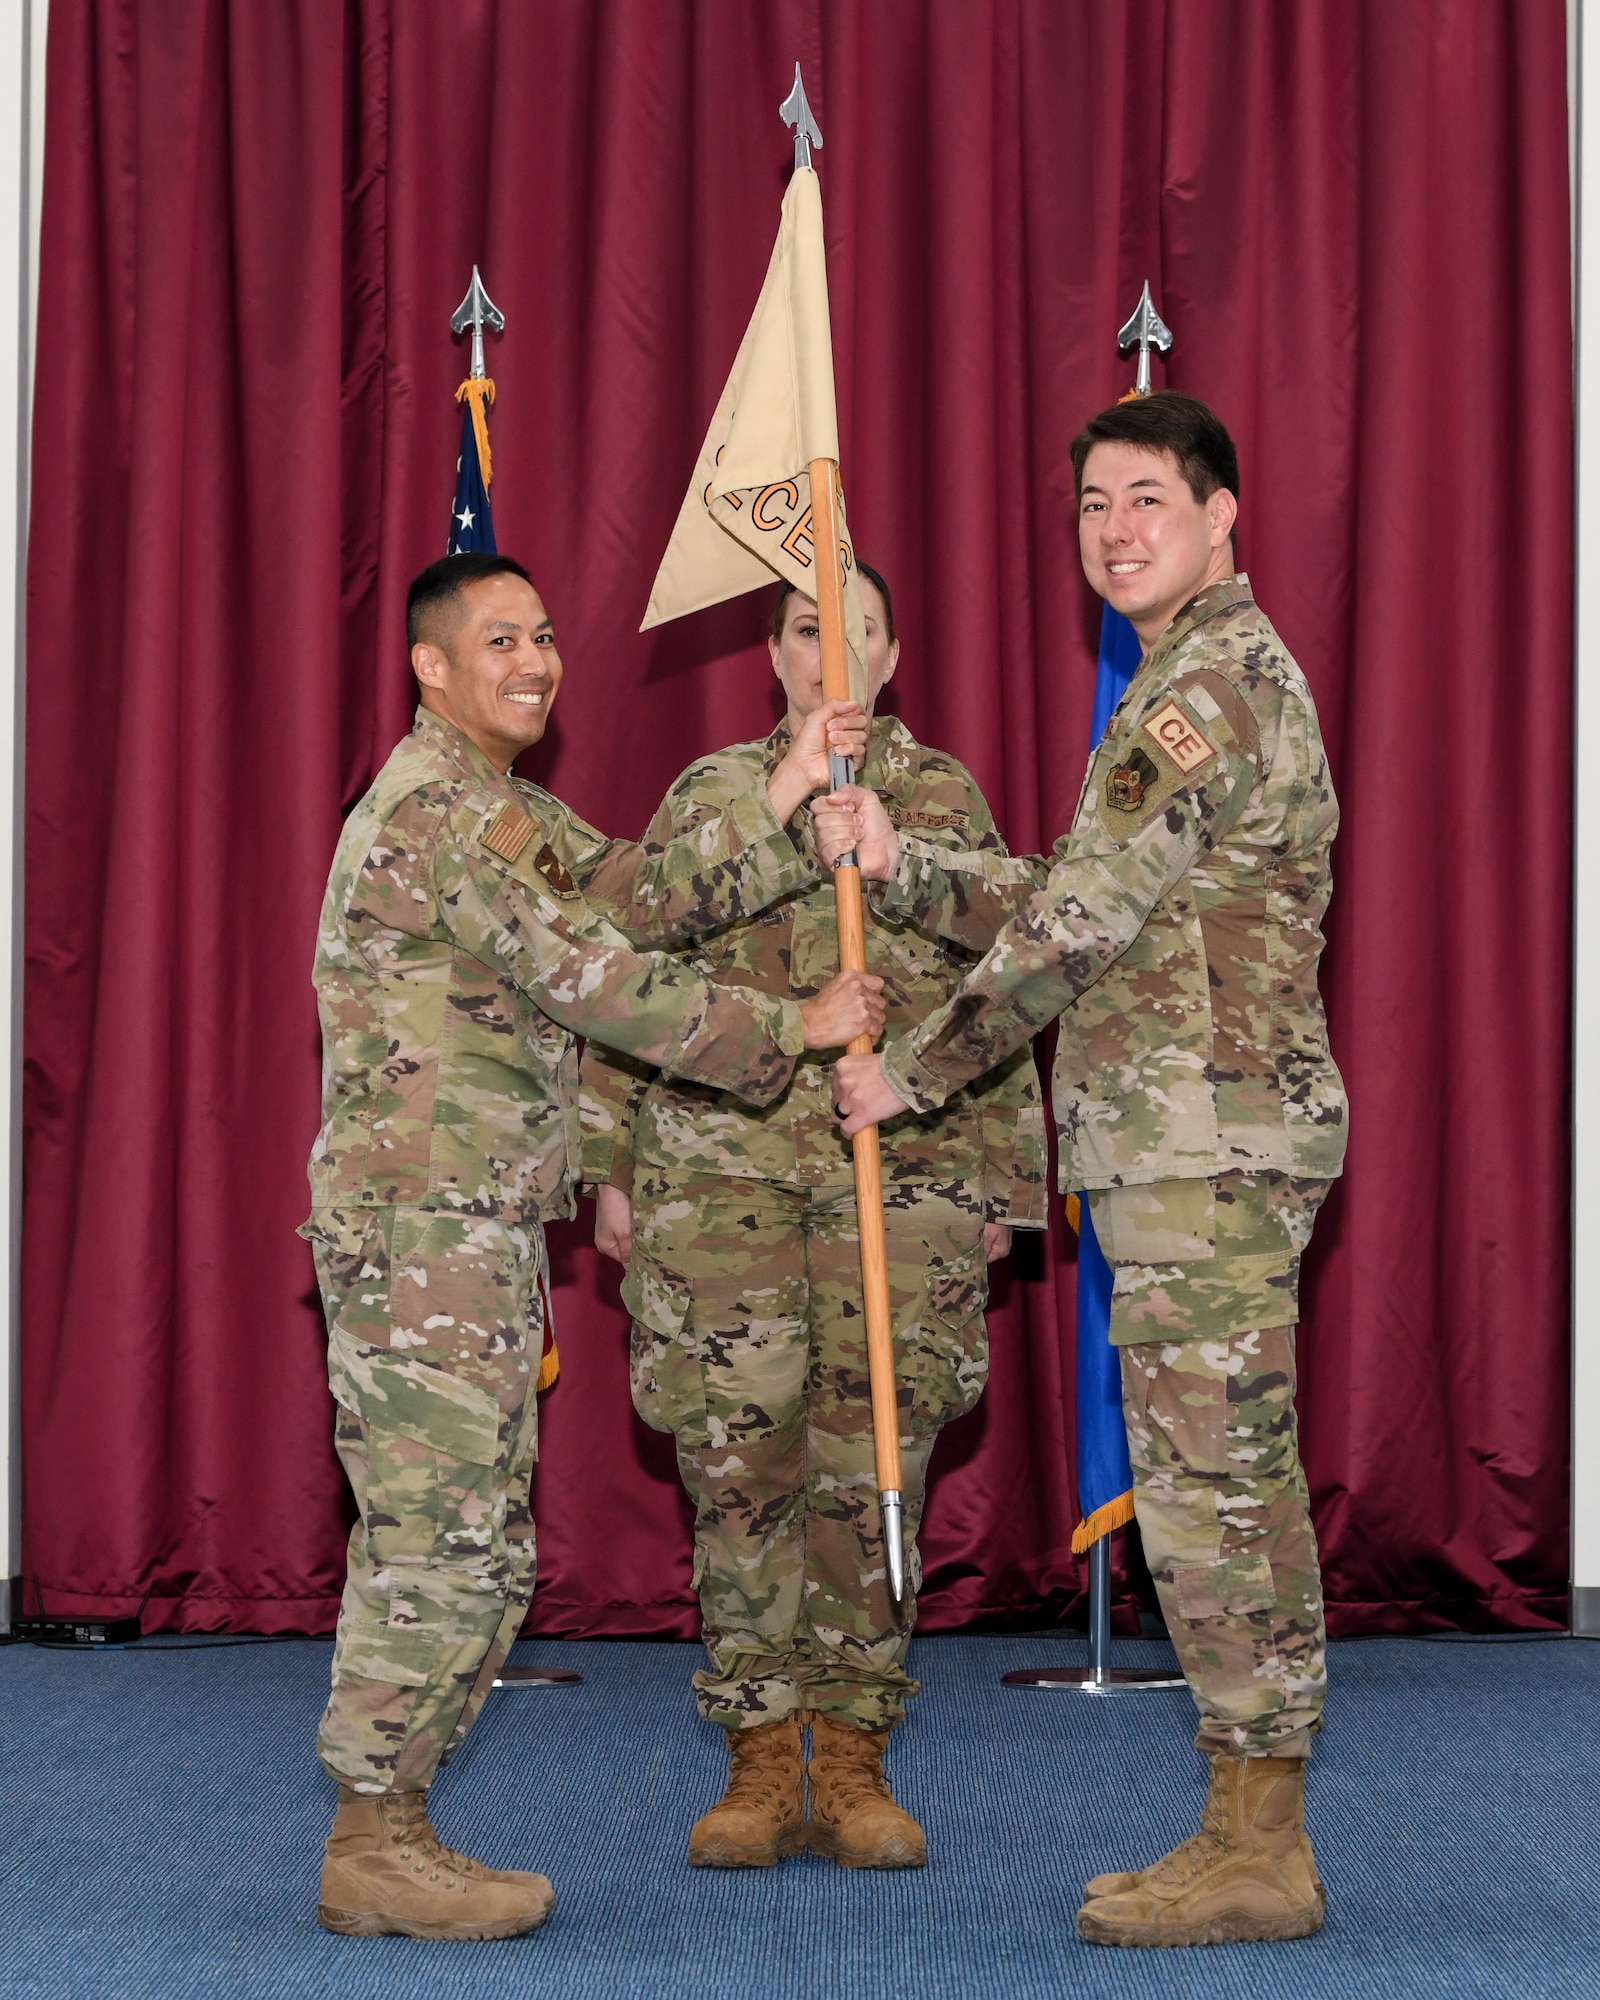 Colonel Todd T. Inouye, the previous 380th Expeditionary Mission Support Group commander and new 380th Air Expeditionary Wing A1/4/6/7 staff director, passes a guidon to Lt. Col. Nick Saccone, the new commander of the 380th Expeditionary Civil Engineer Squadron, during a change of command ceremony May 20, 2022, at Al Dhafra Air Base, United Arab Emirates. The passing of the guidon symbolizes the official transfer of authority from one commander to the next.